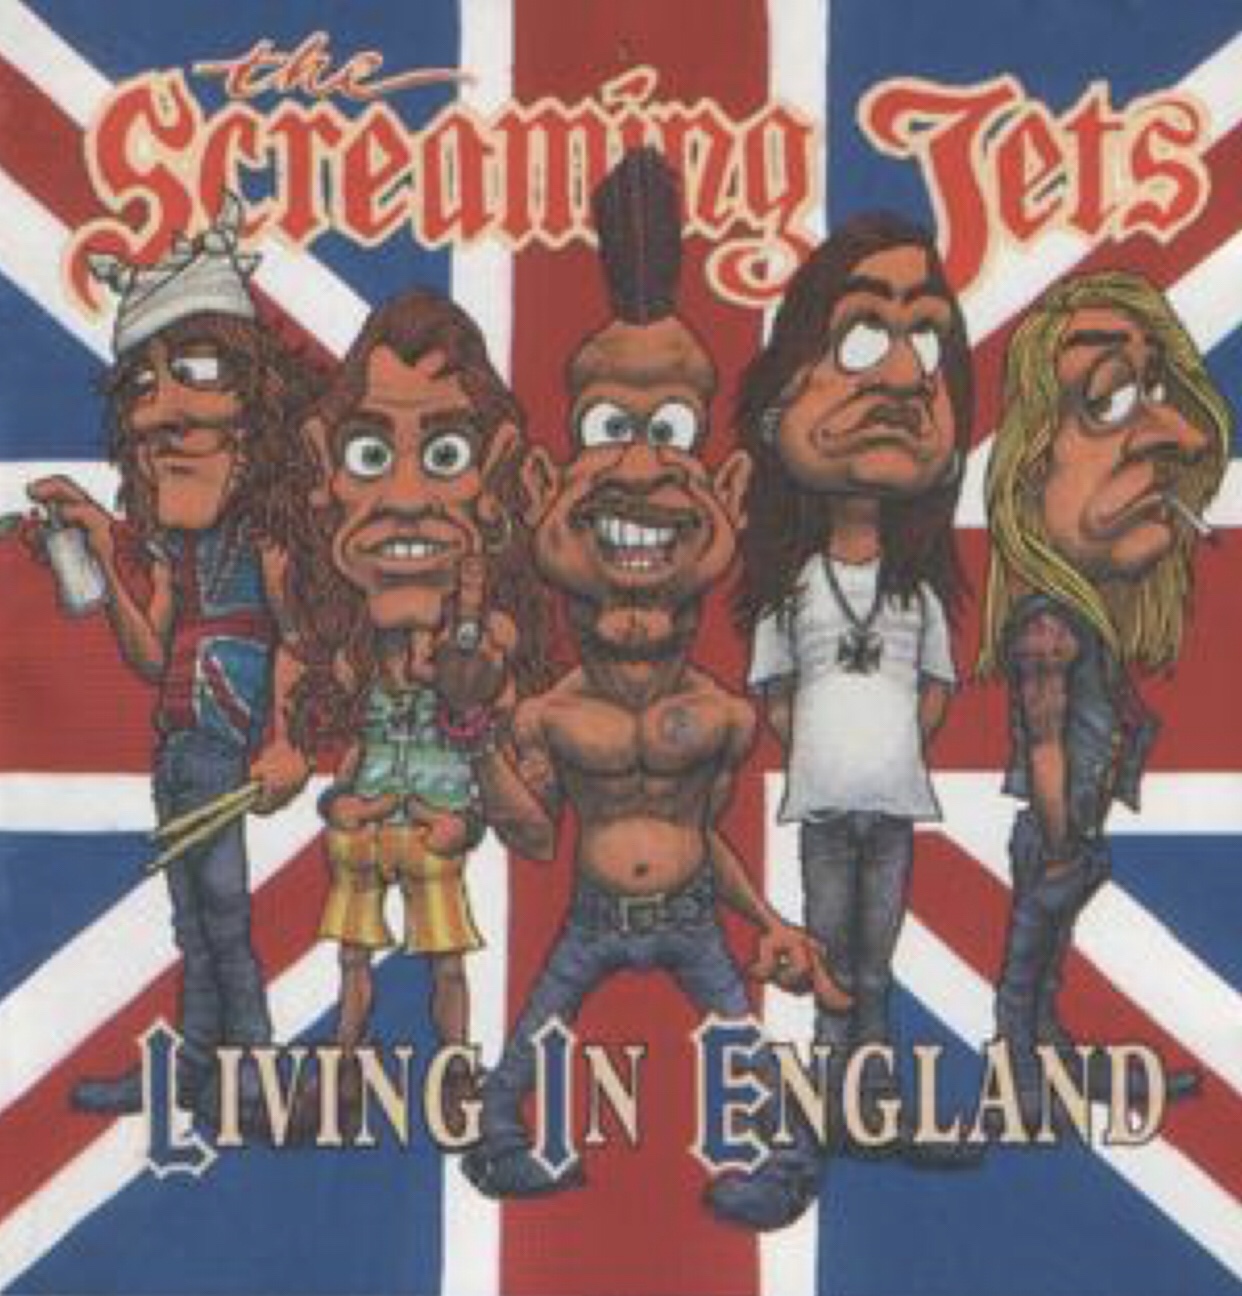 Archive – EP review: The Screaming Jets – Living In England